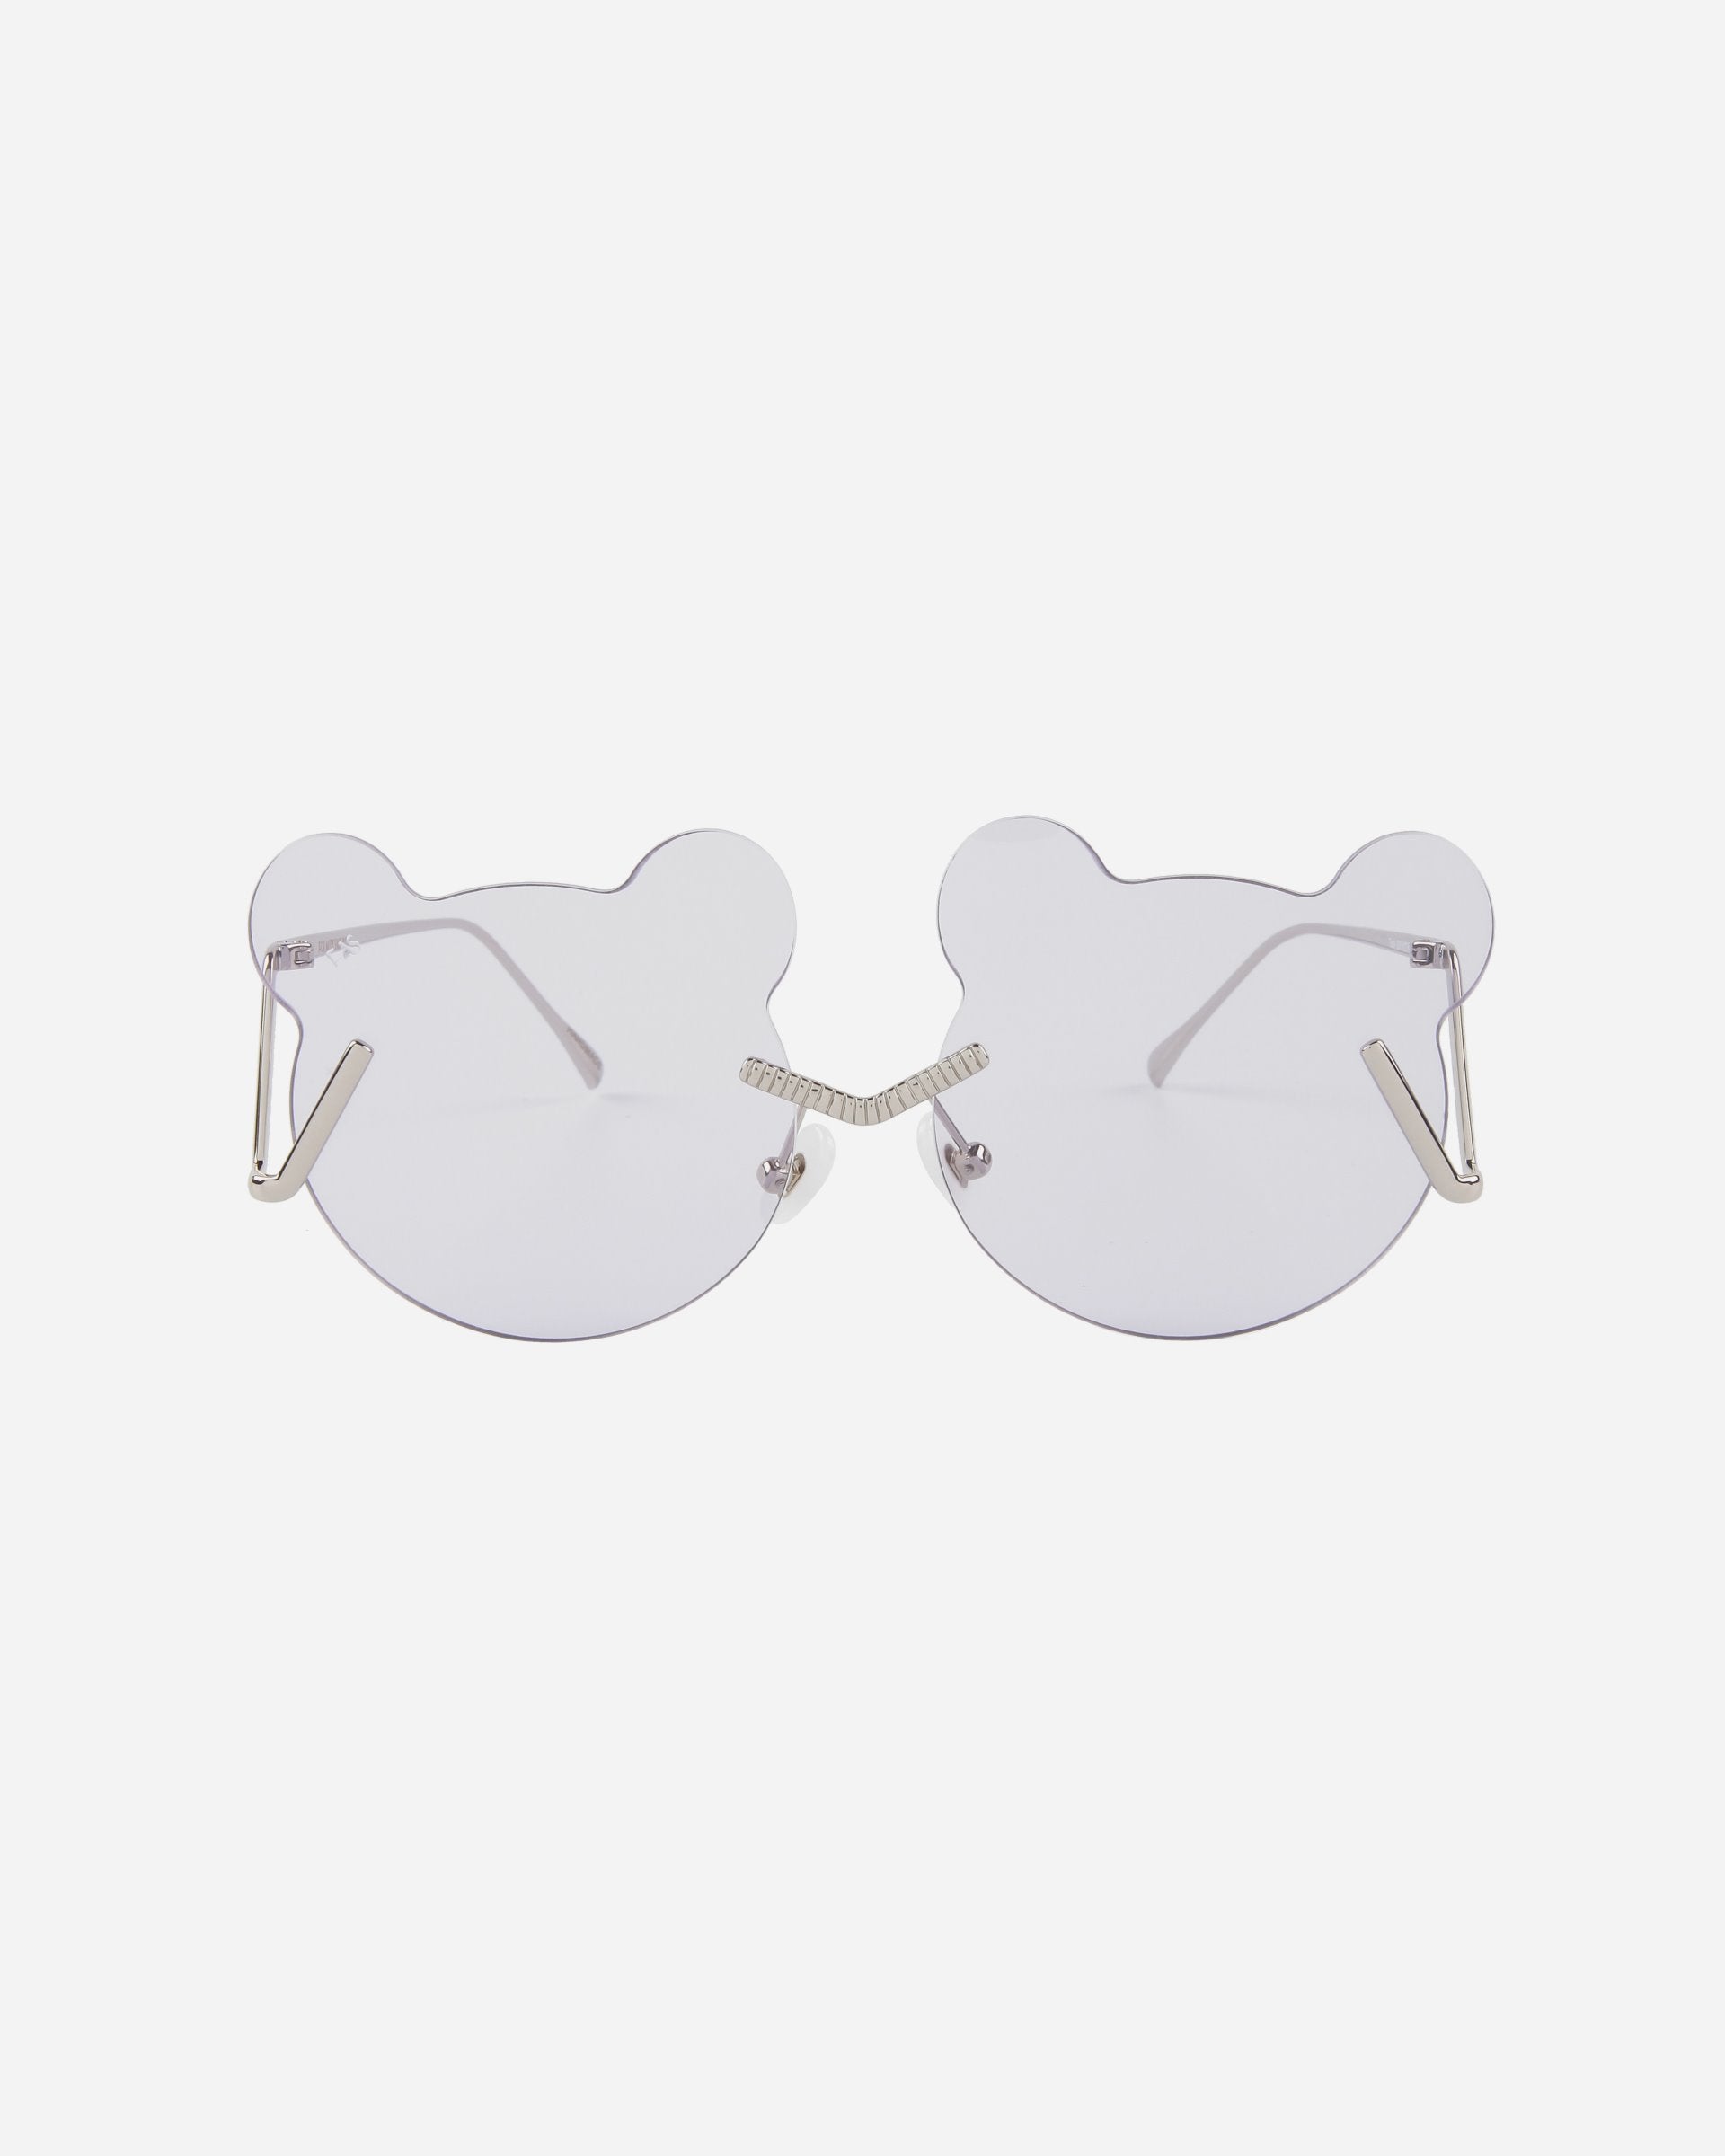 A pair of Teddy sunglasses by For Art's Sake® with lenses shaped like bear heads. The thin, metallic stainless steel frames and adjustable nosepads ensure a comfortable fit. The light, translucent shade offers UV protection, making the overall design playful and whimsical yet functional.